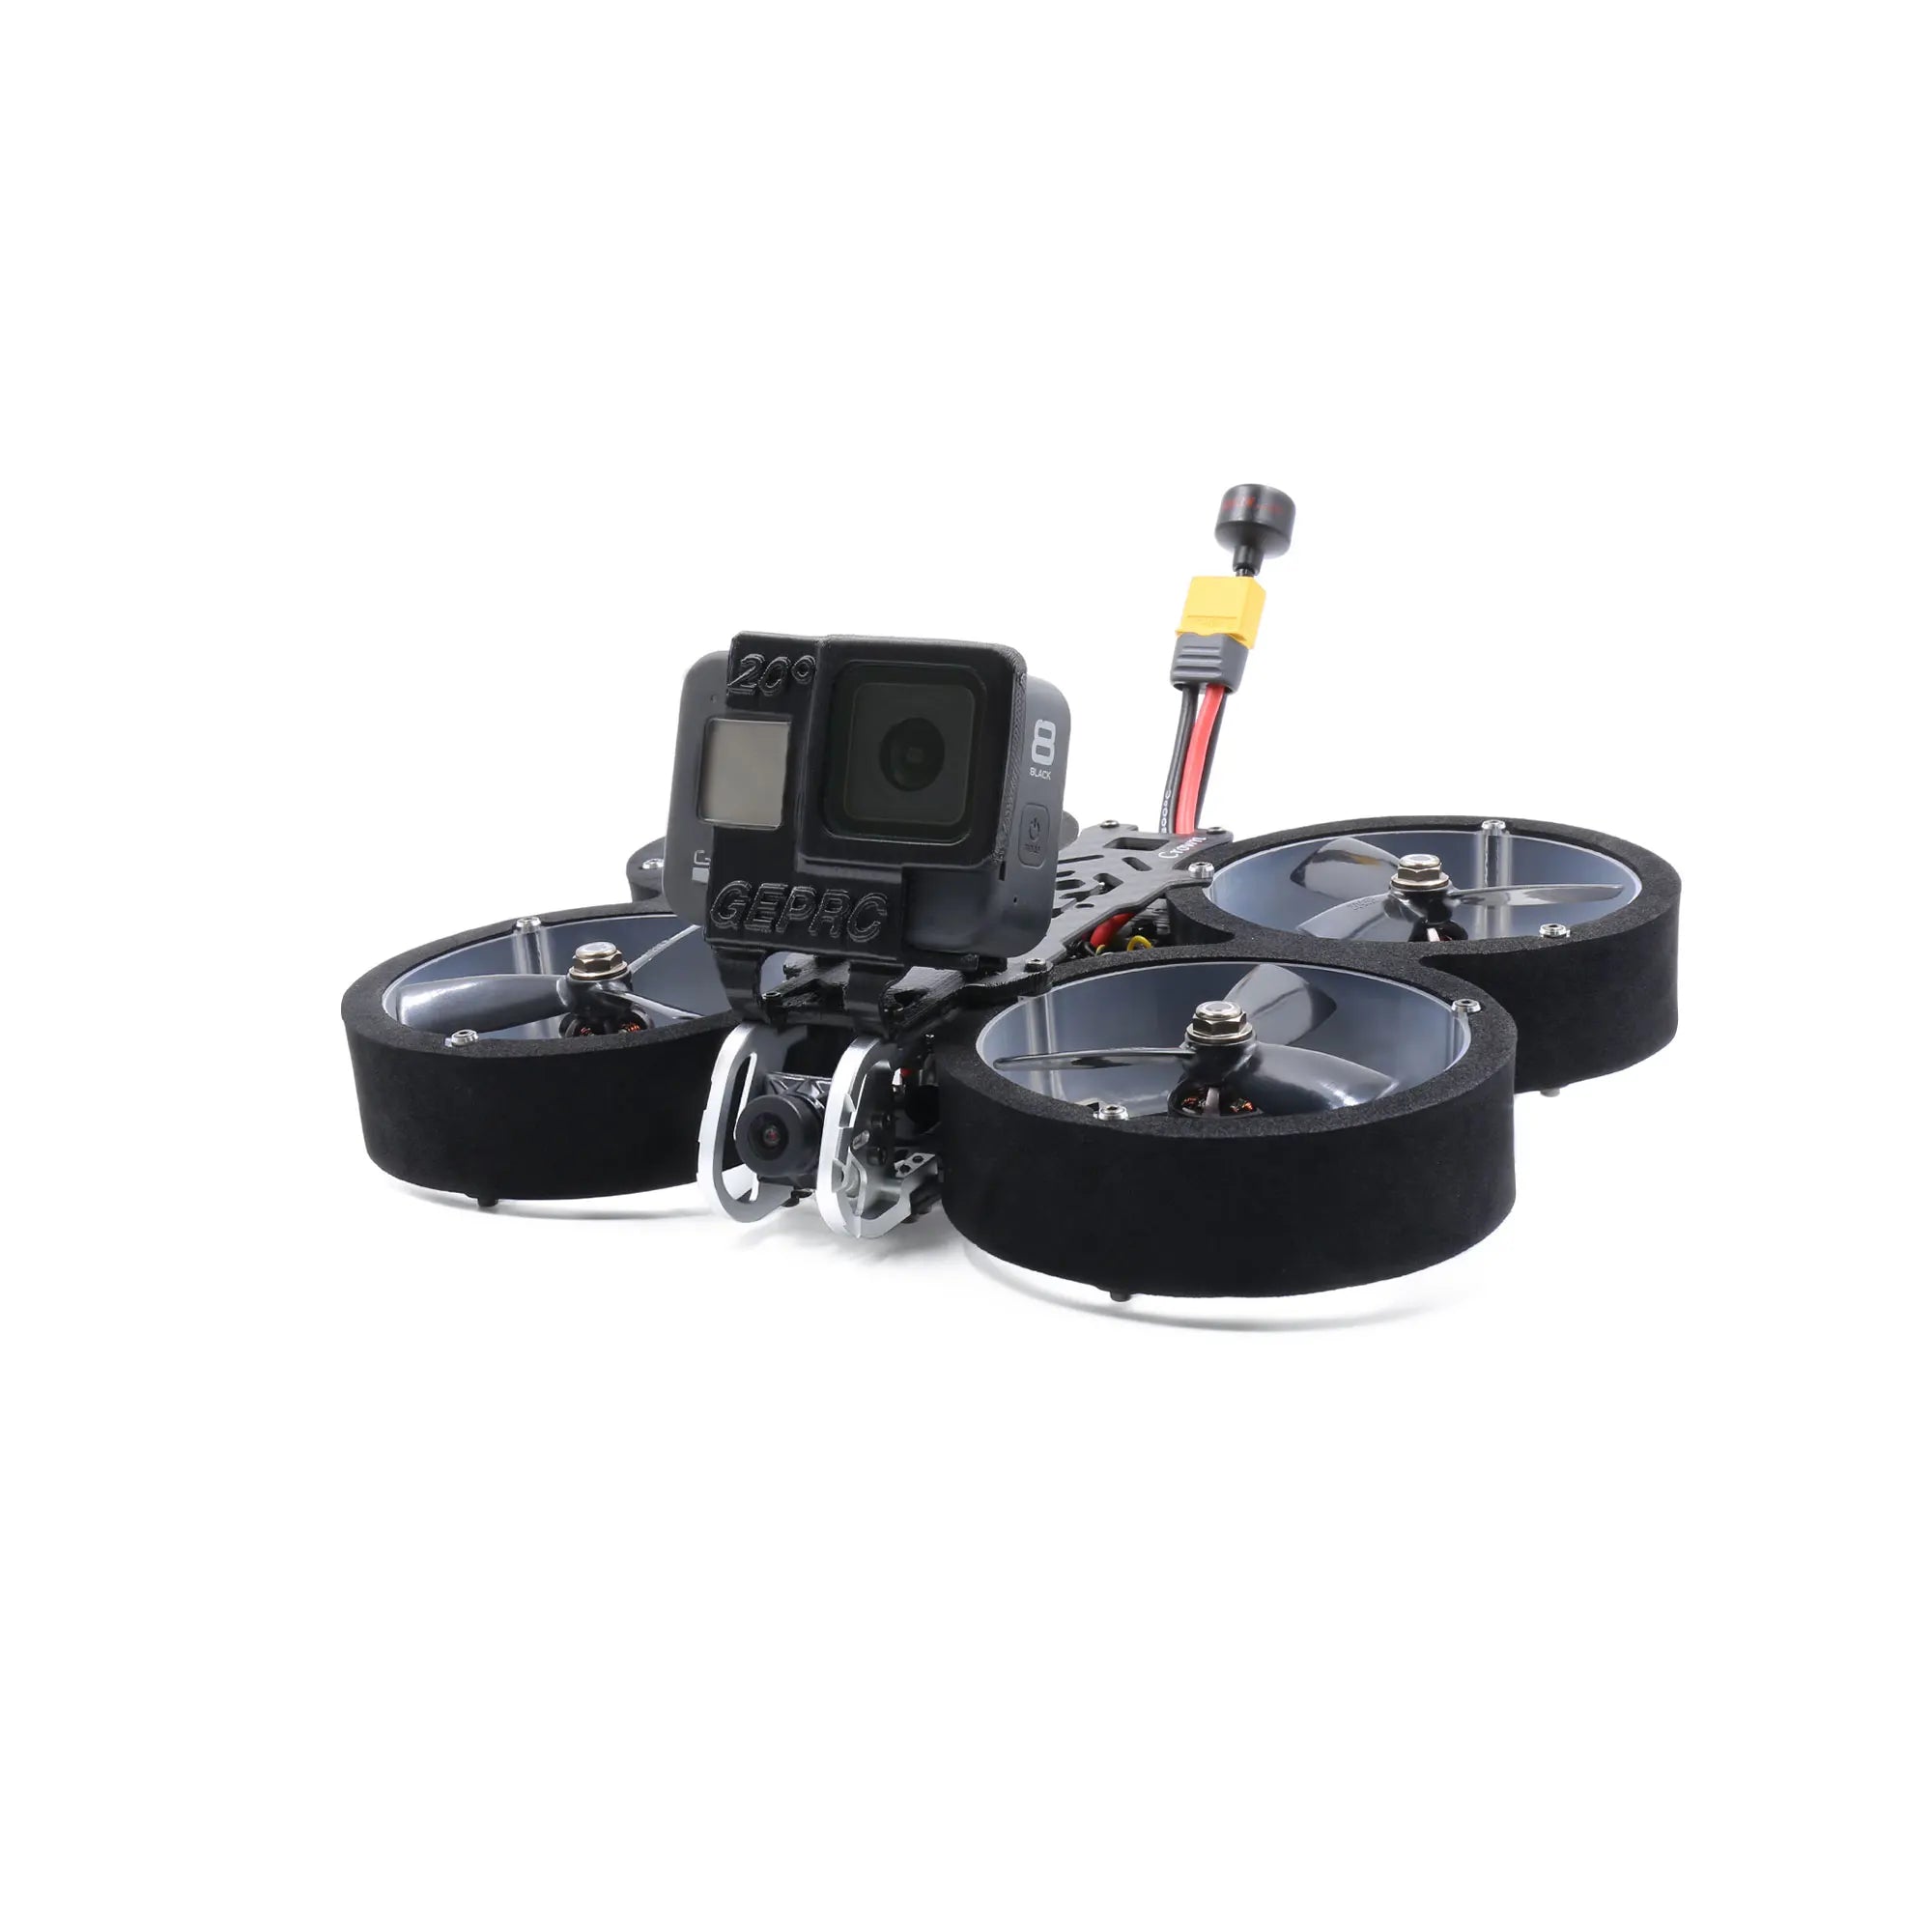 GEPRC Crown HD Cinewhoop FPV Drone, Find an open and suitable flying location, adhering to local regulations and safety guidelines.